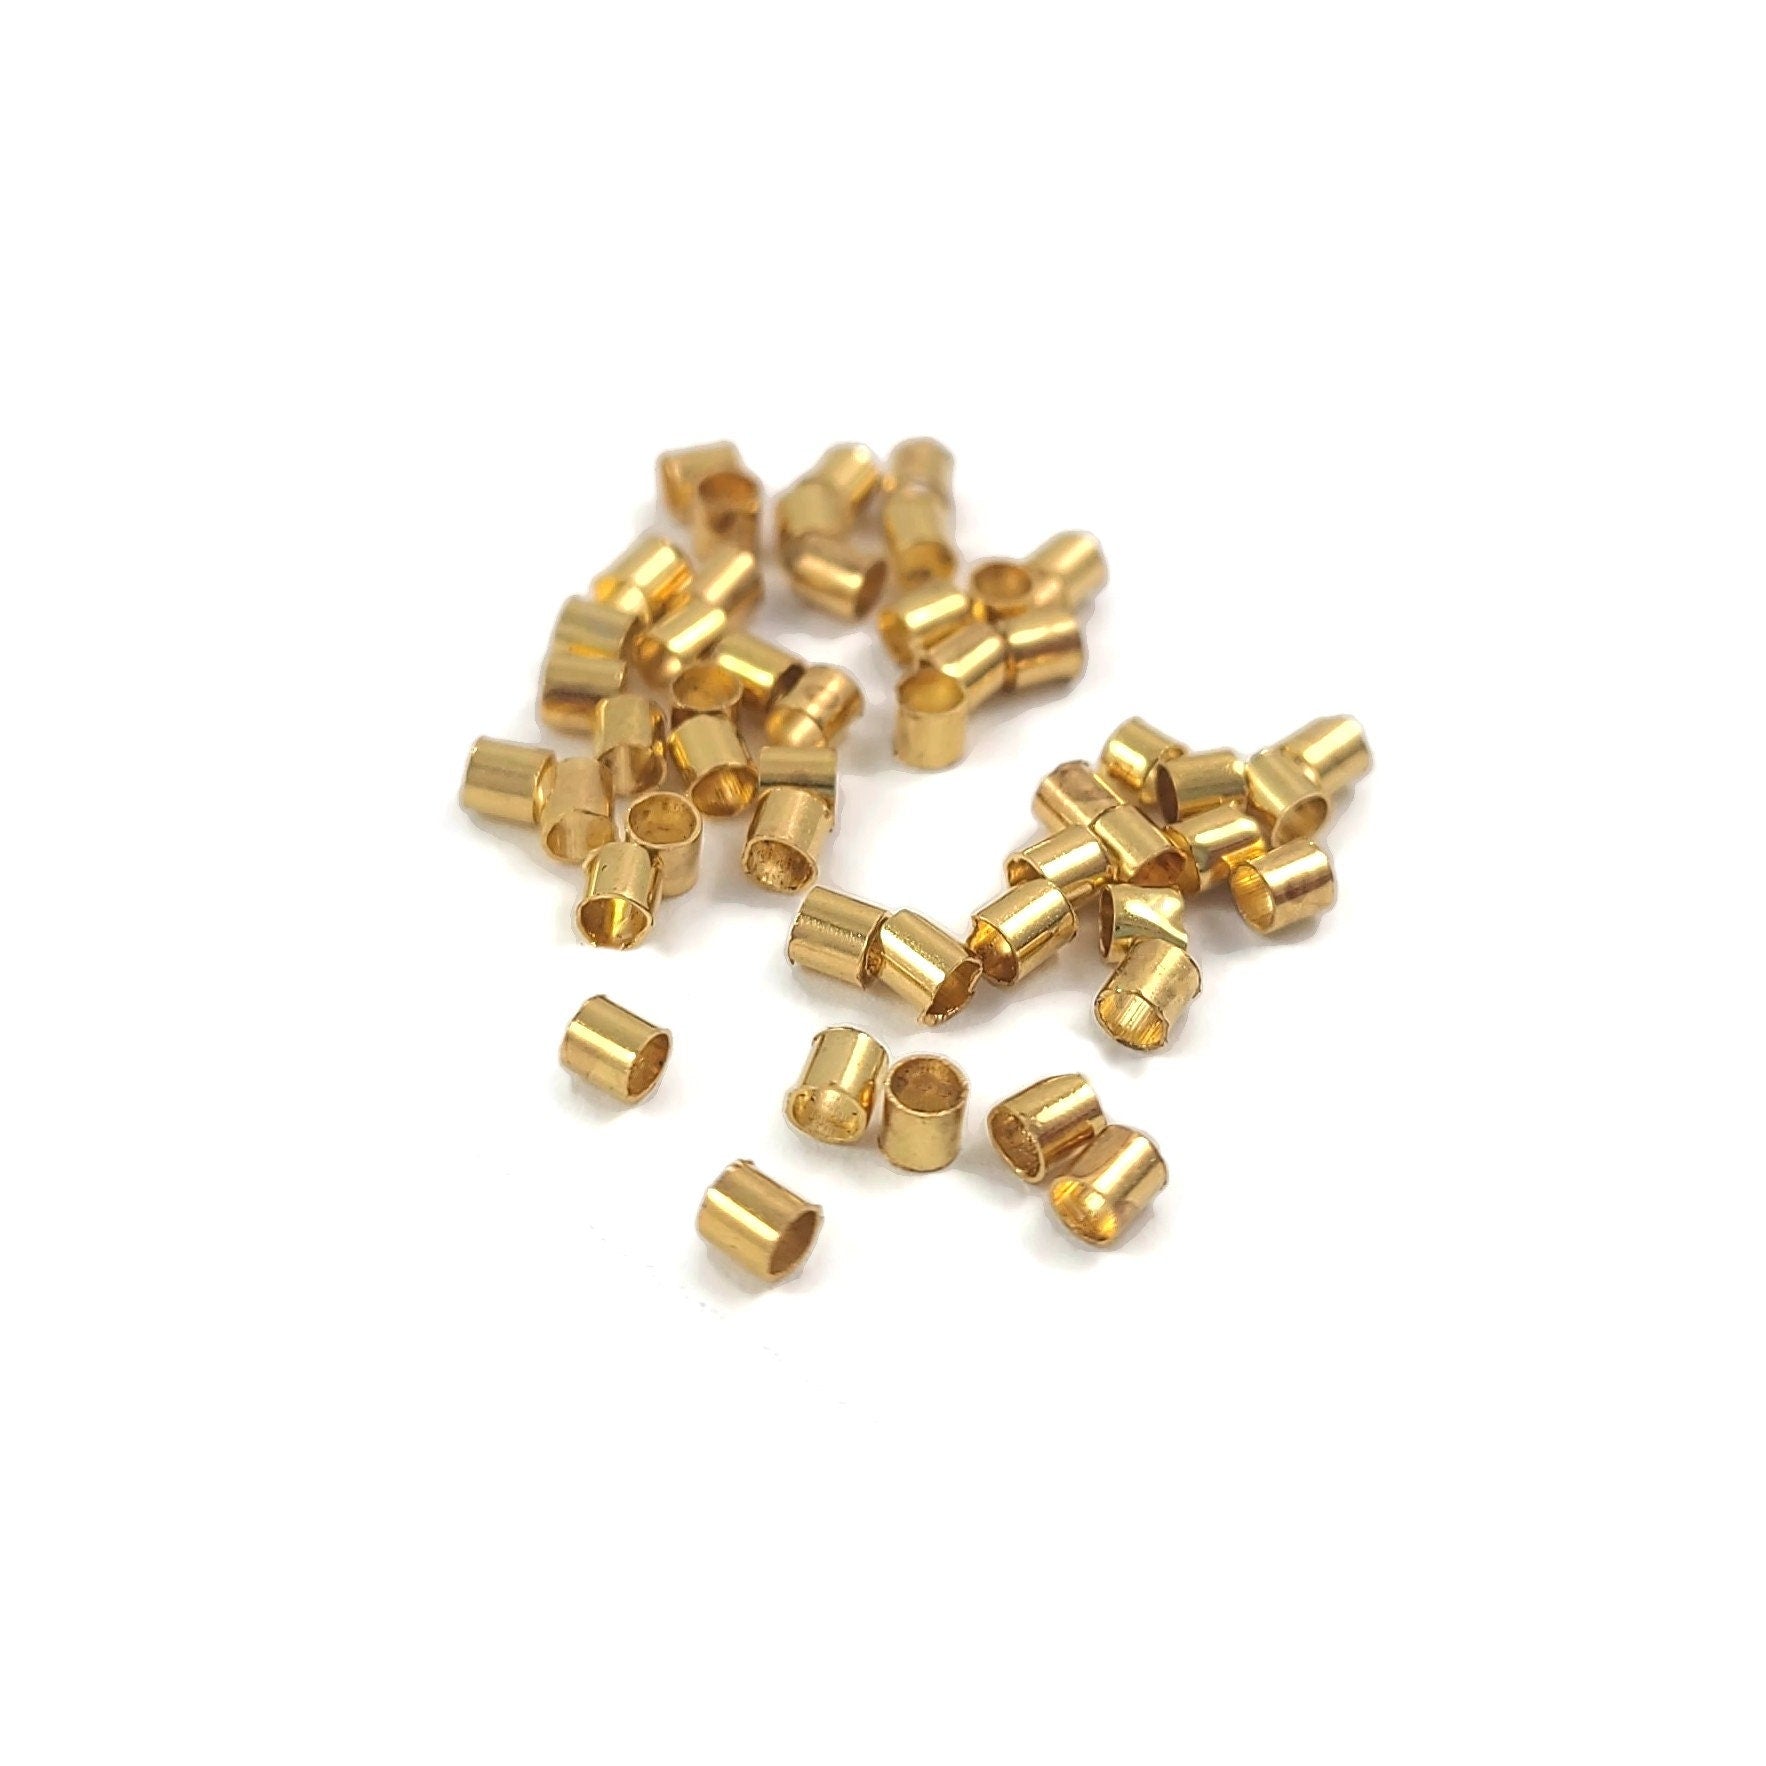 2mm gold crimp tube beads - Nickel, lead, and cadmium free - Hypoallergenic jewelry making findings